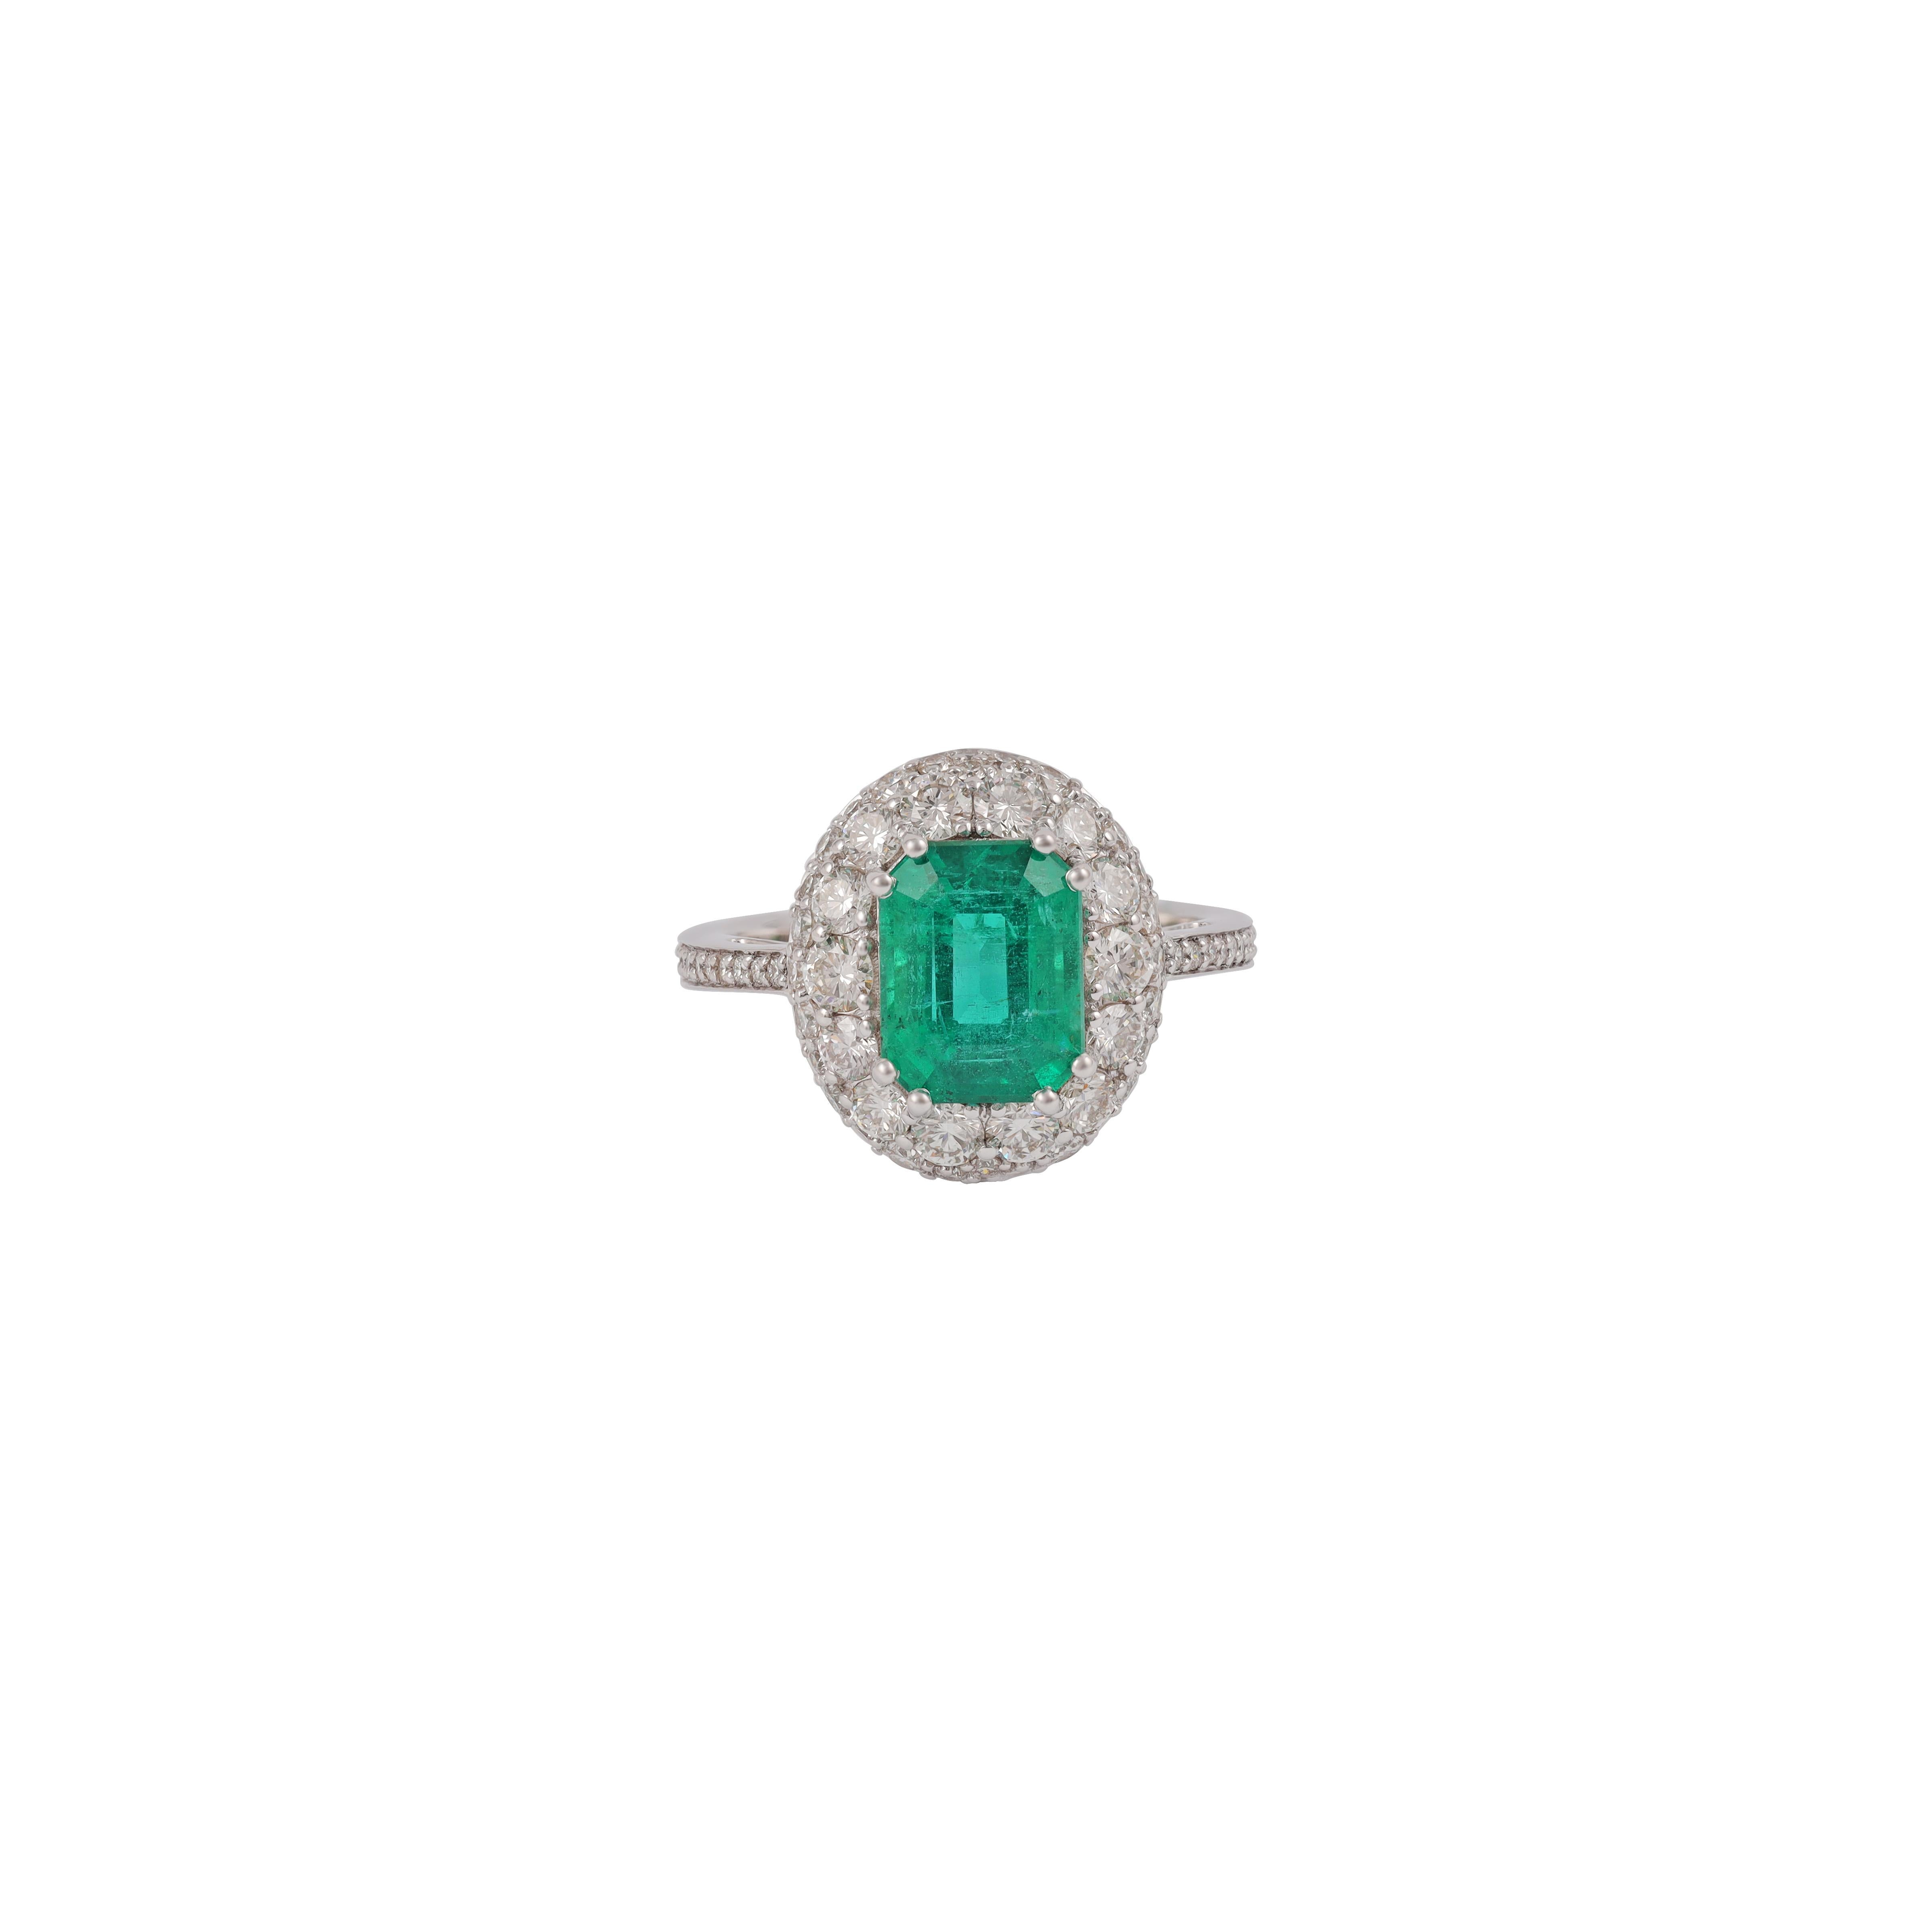 This is an elegant emerald & diamond ring studded in 18k white gold with 1 piece of Emerald Cut  shaped Zambian emerald weight 2.97 carat which is surrounded by 62 pieces of round shaped diamonds weight 1.39 carat, this entire ring studded in 18k